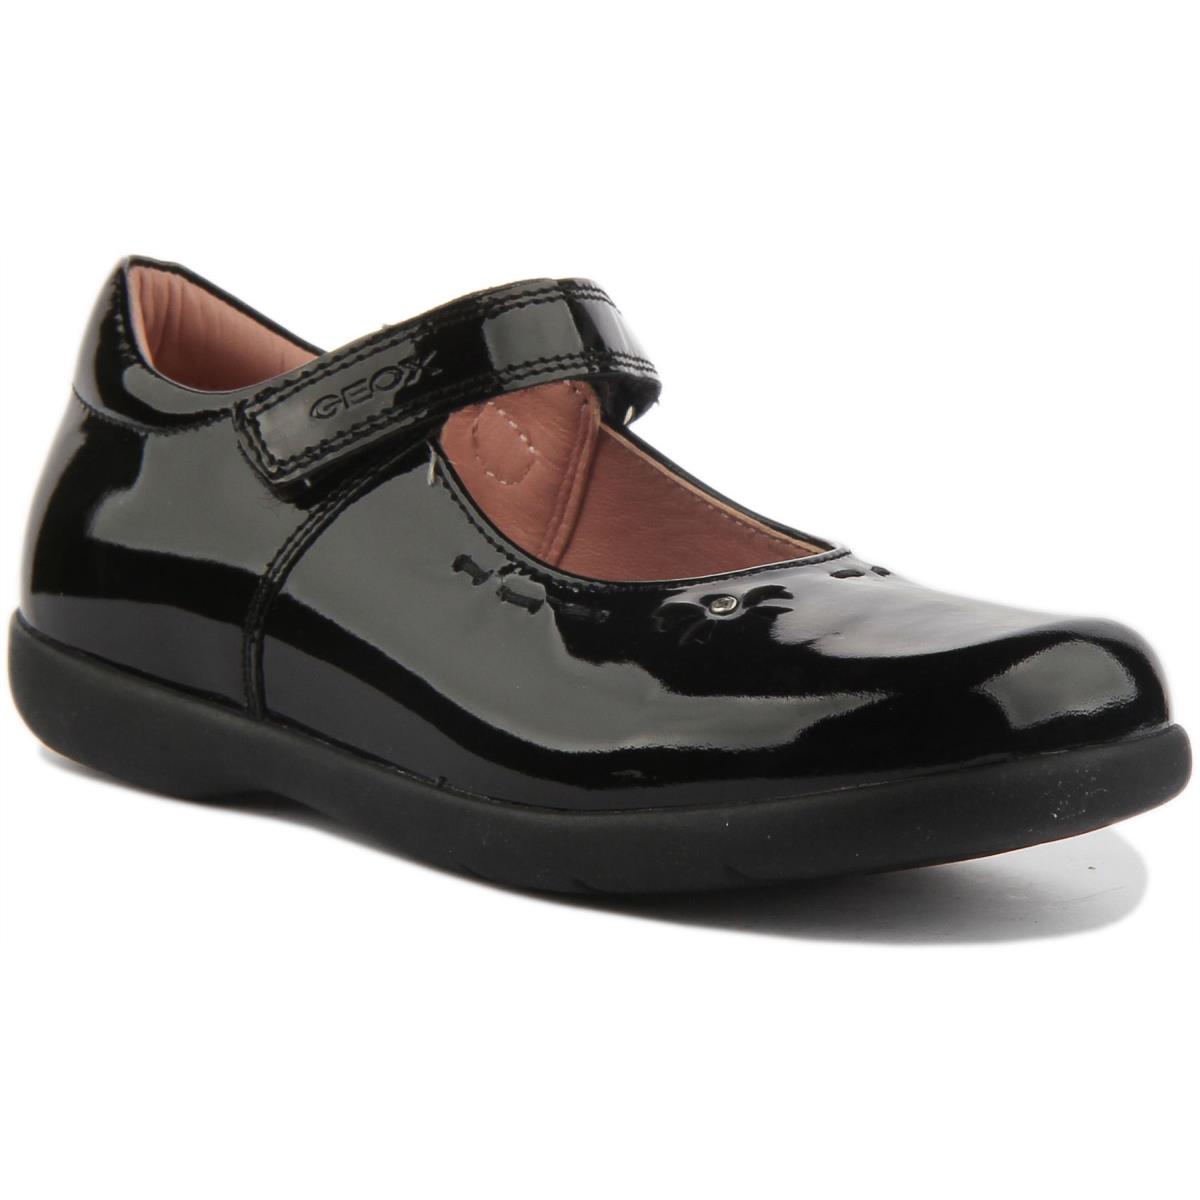 Geox Naimara Girls Mary Jane Leather School Shoes In Black Patent Size US 9 - 13 BLACK PATENT